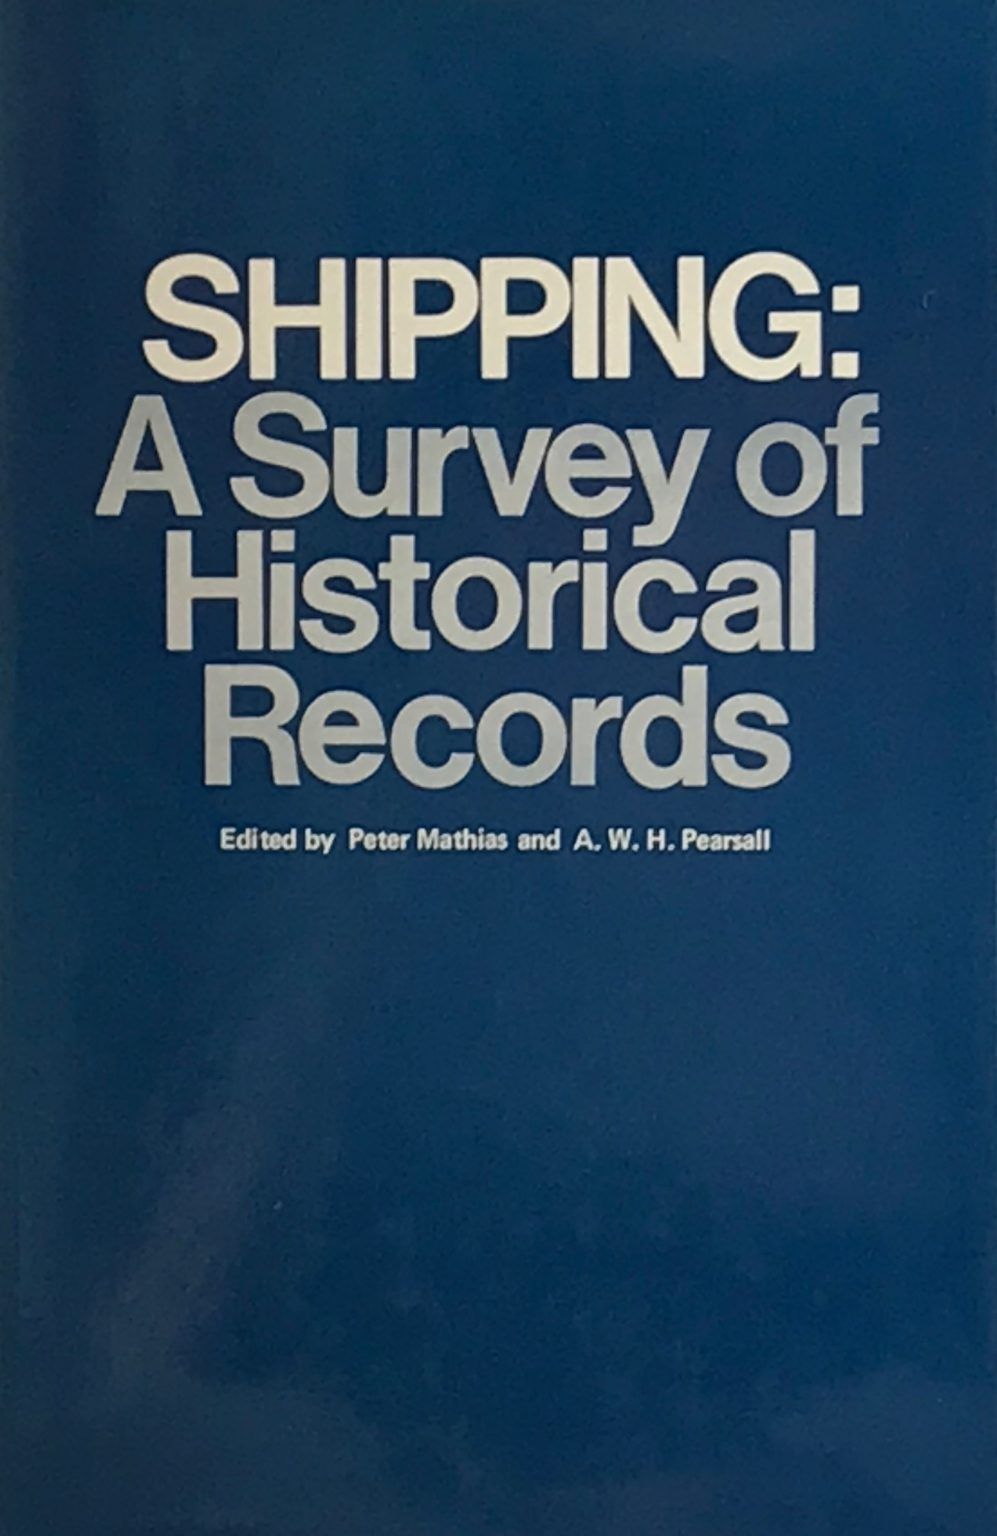 SHIPPING: A Survey of Historical Records